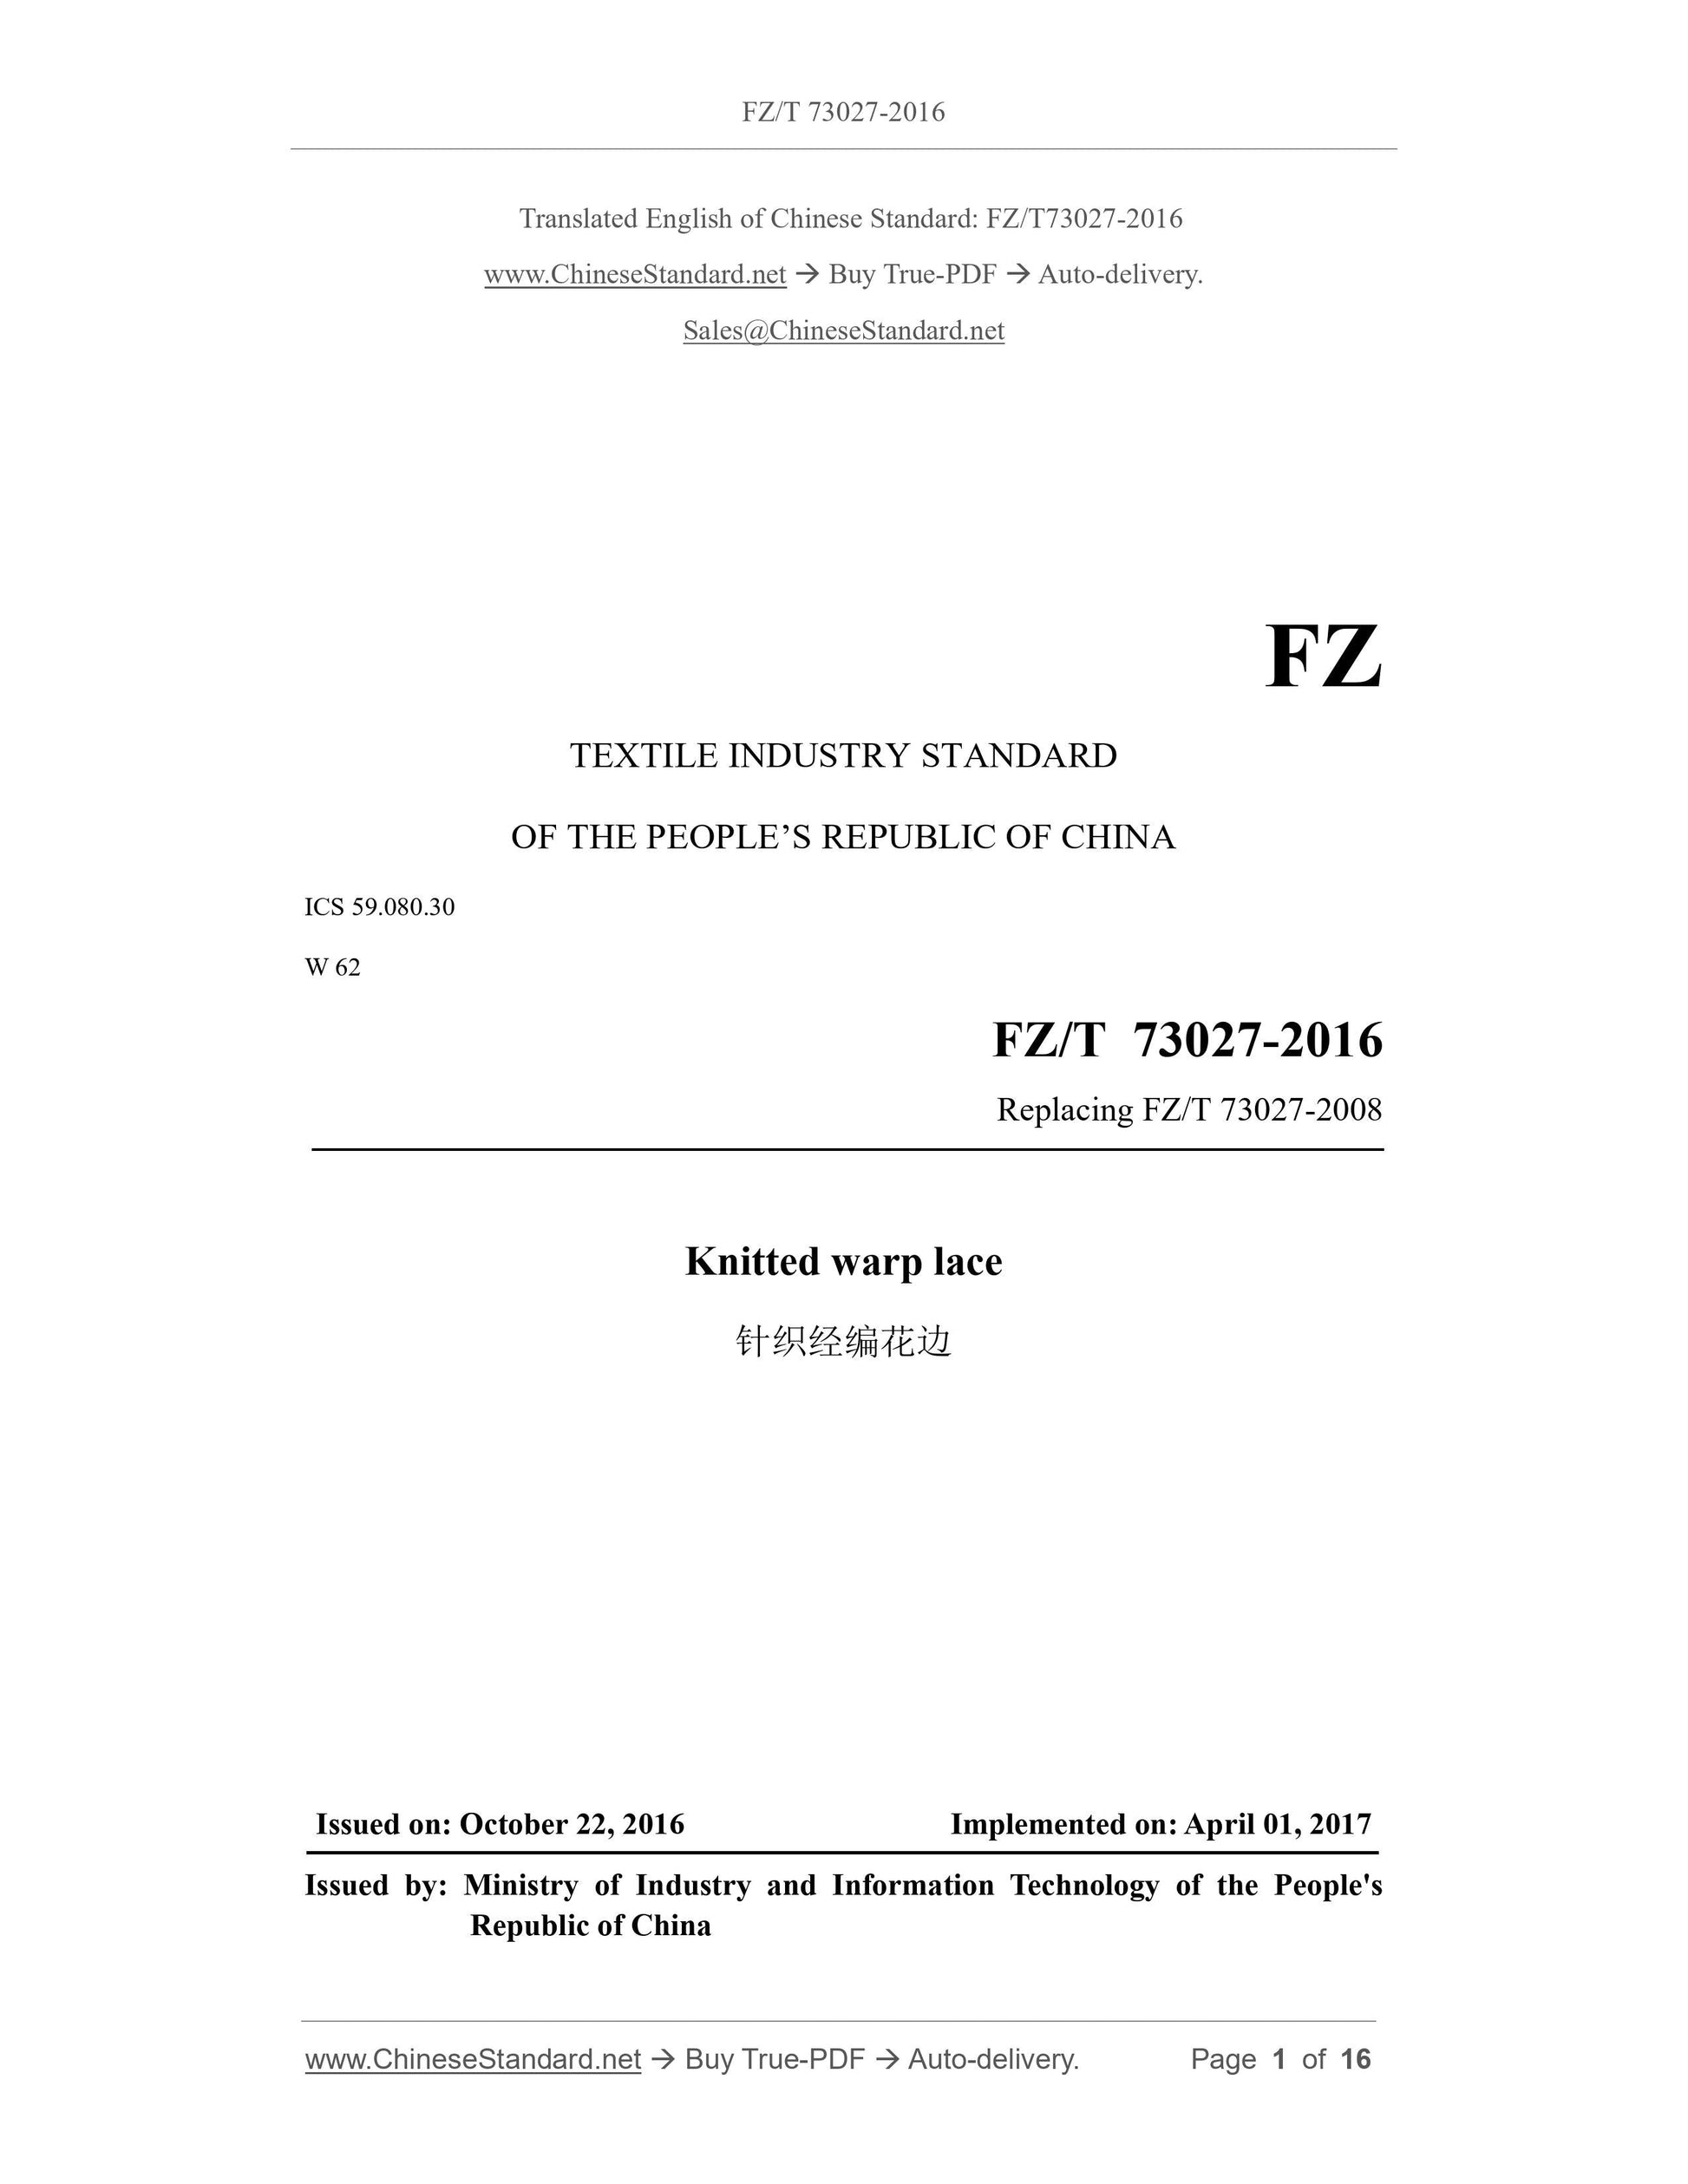 FZ/T 73027-2016 Page 1